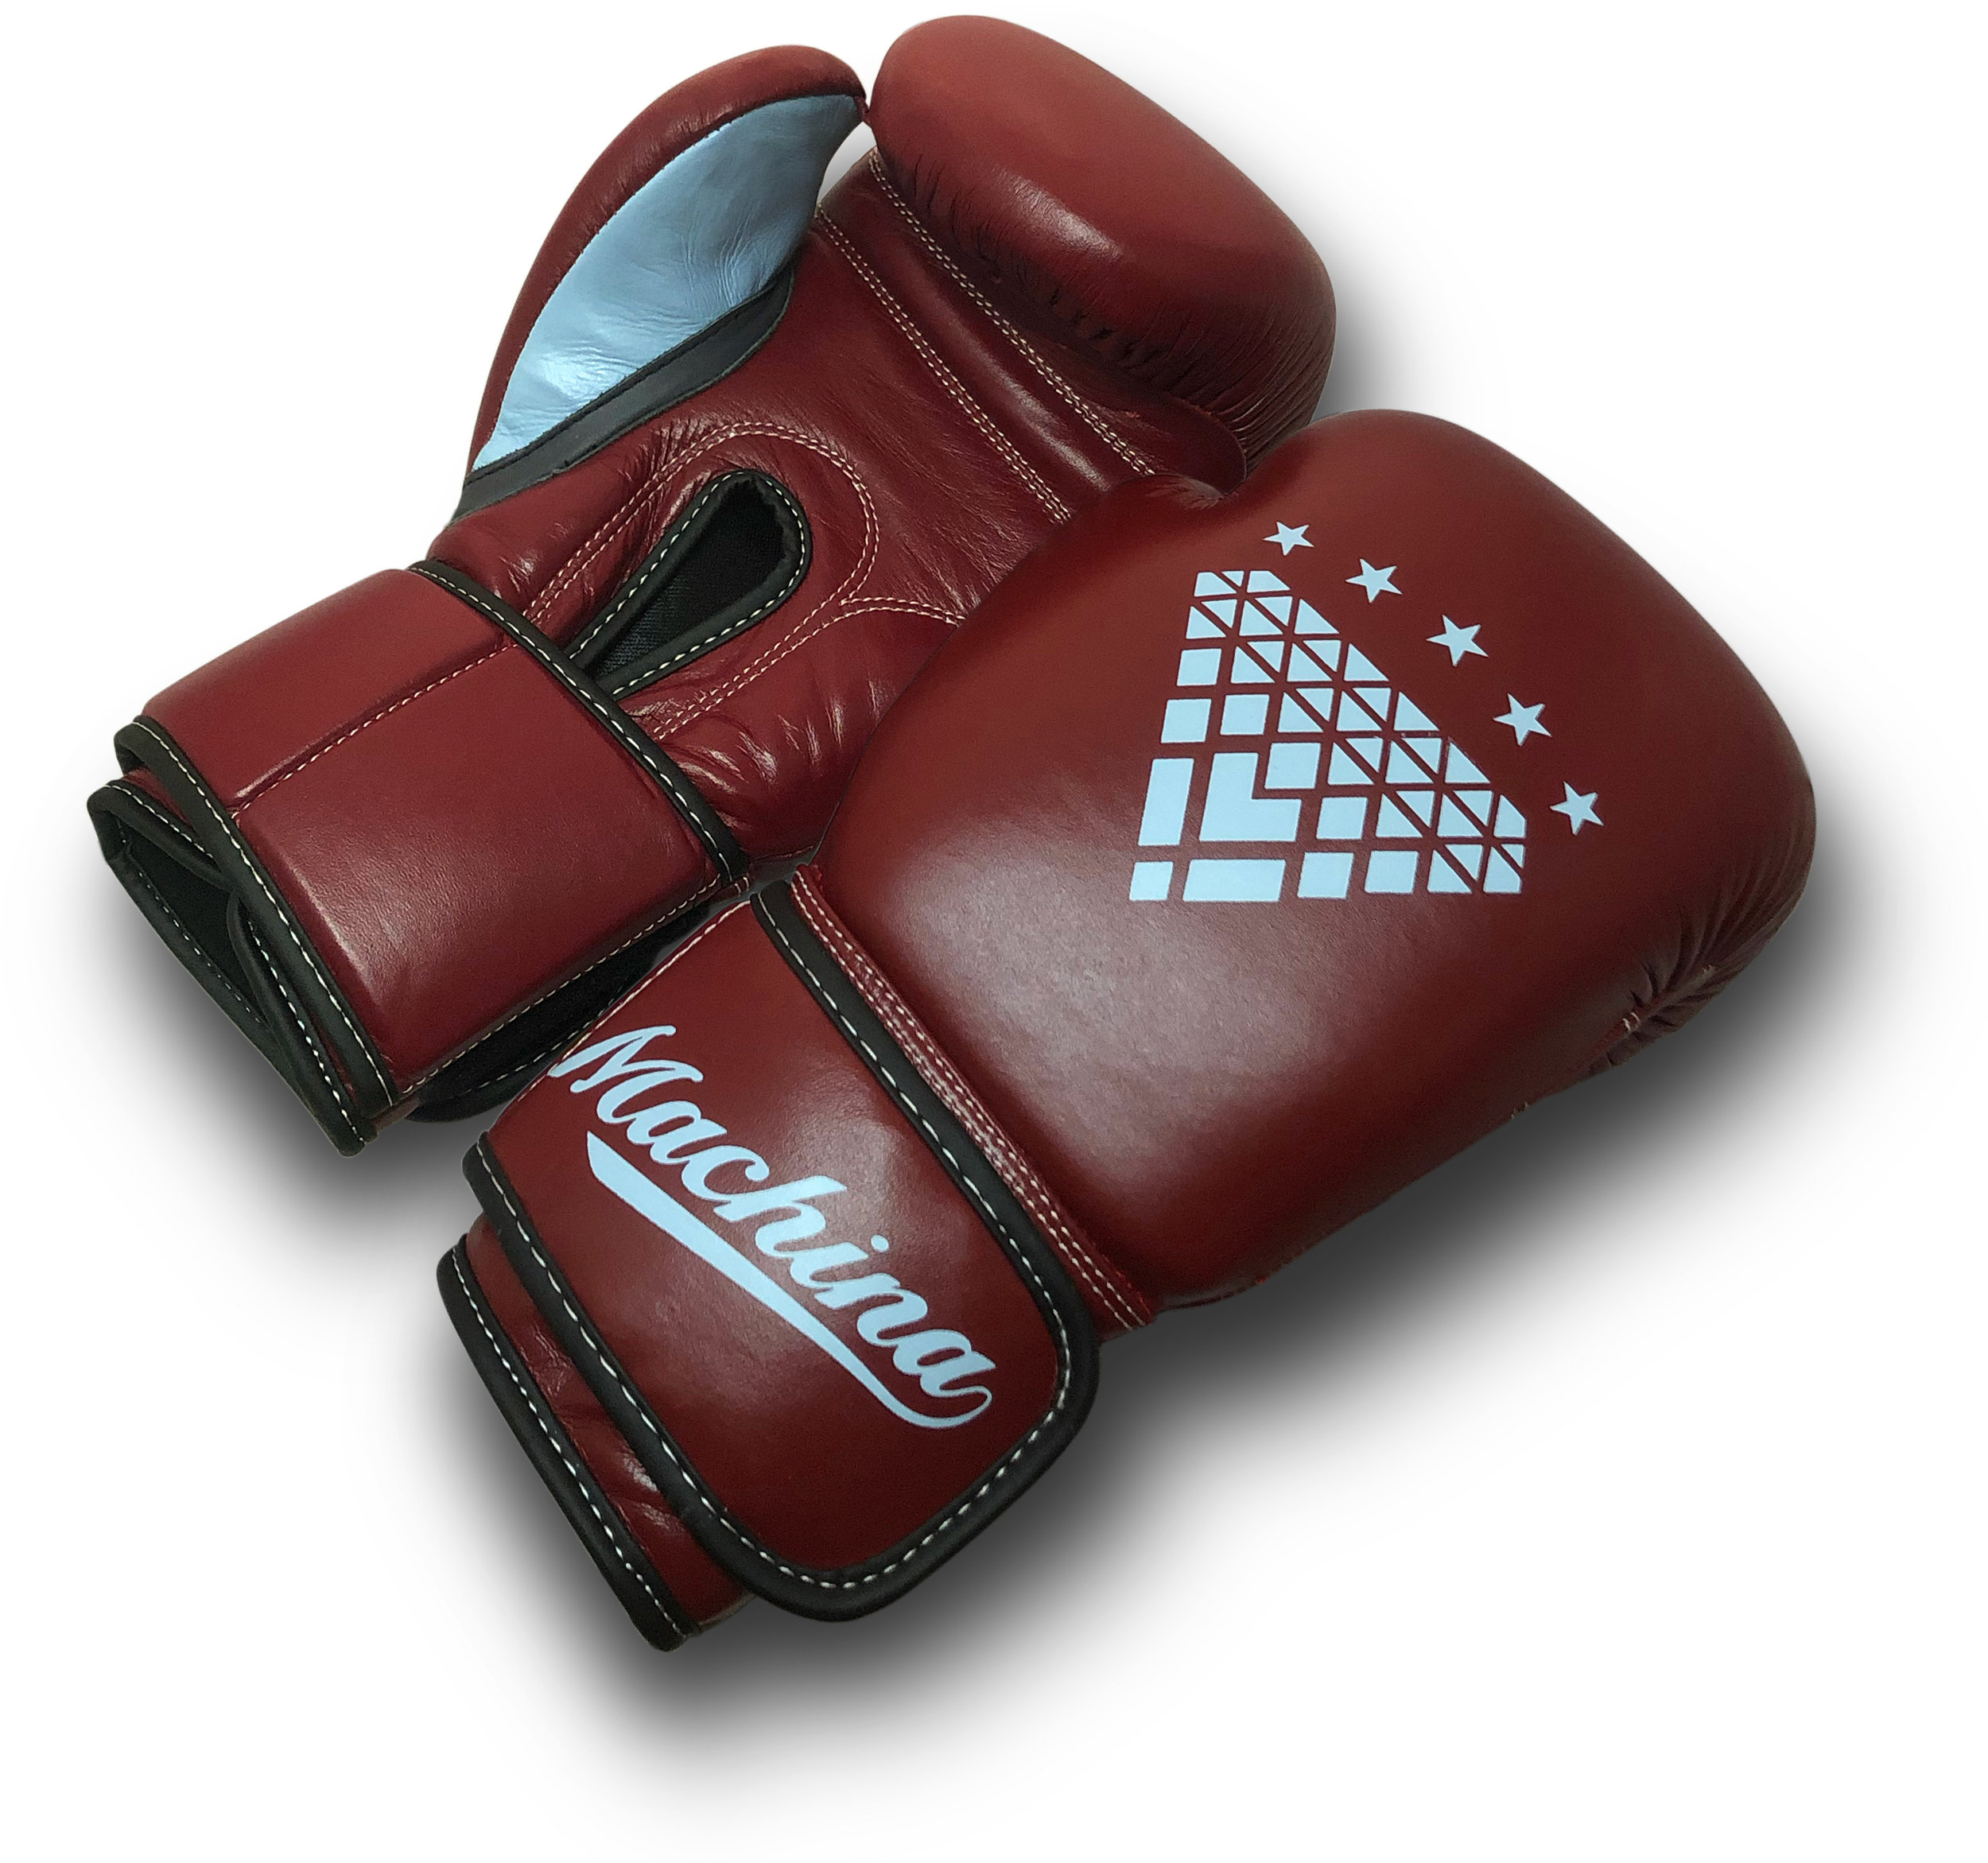 Machina Carbonado 12 Ounce Women's Leather Boxing Gloves DARK RED 